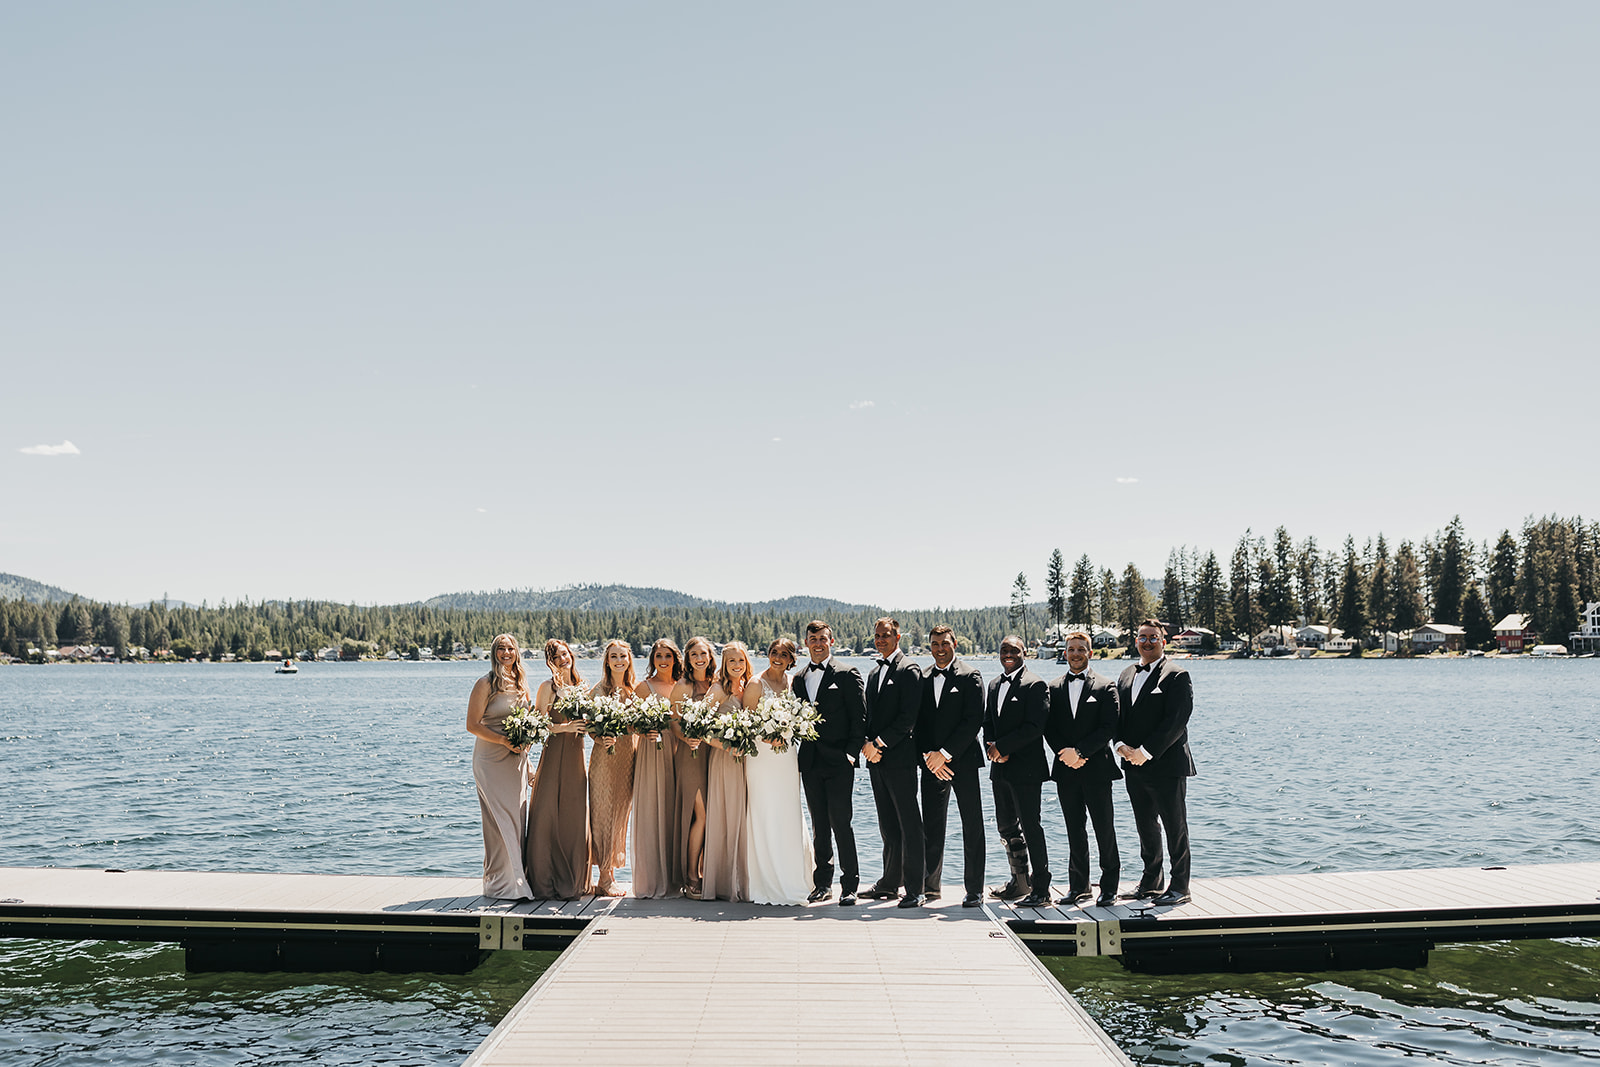 Wedding party on private dock before wedding ceremony on private lake front property.